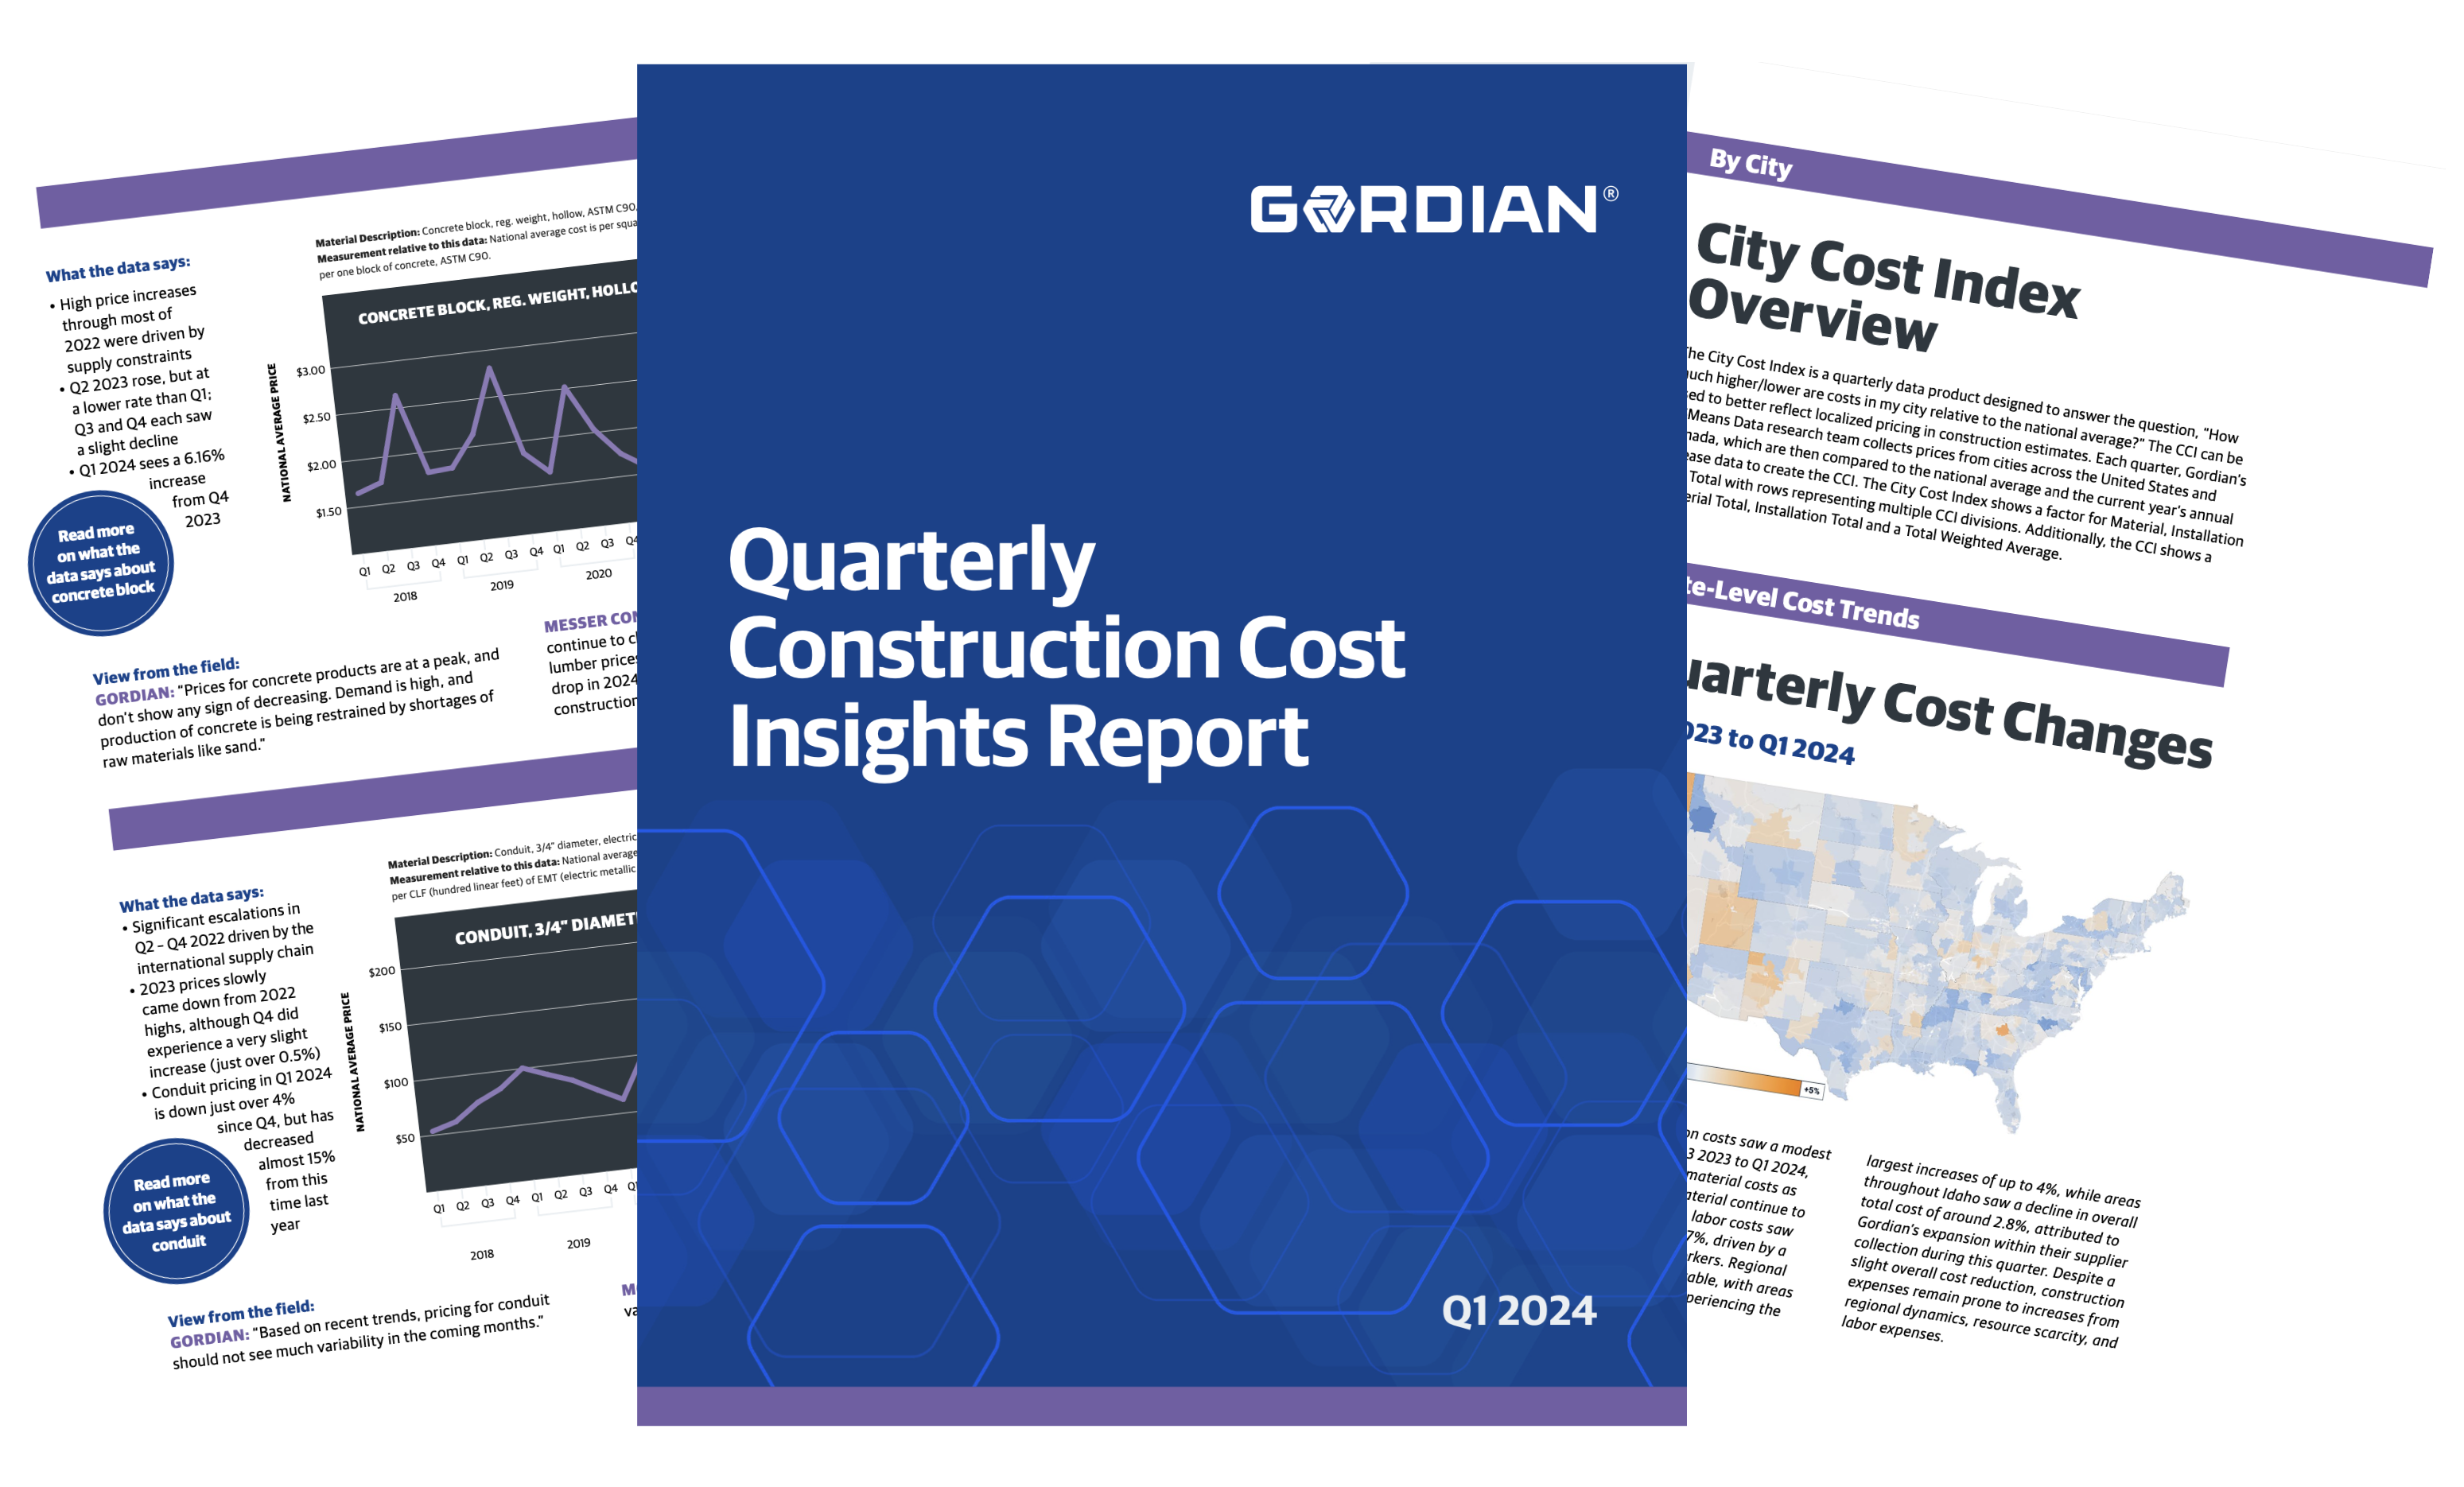 Gordian’s Q1 2024 Quarterly Construction Cost Insights Report 